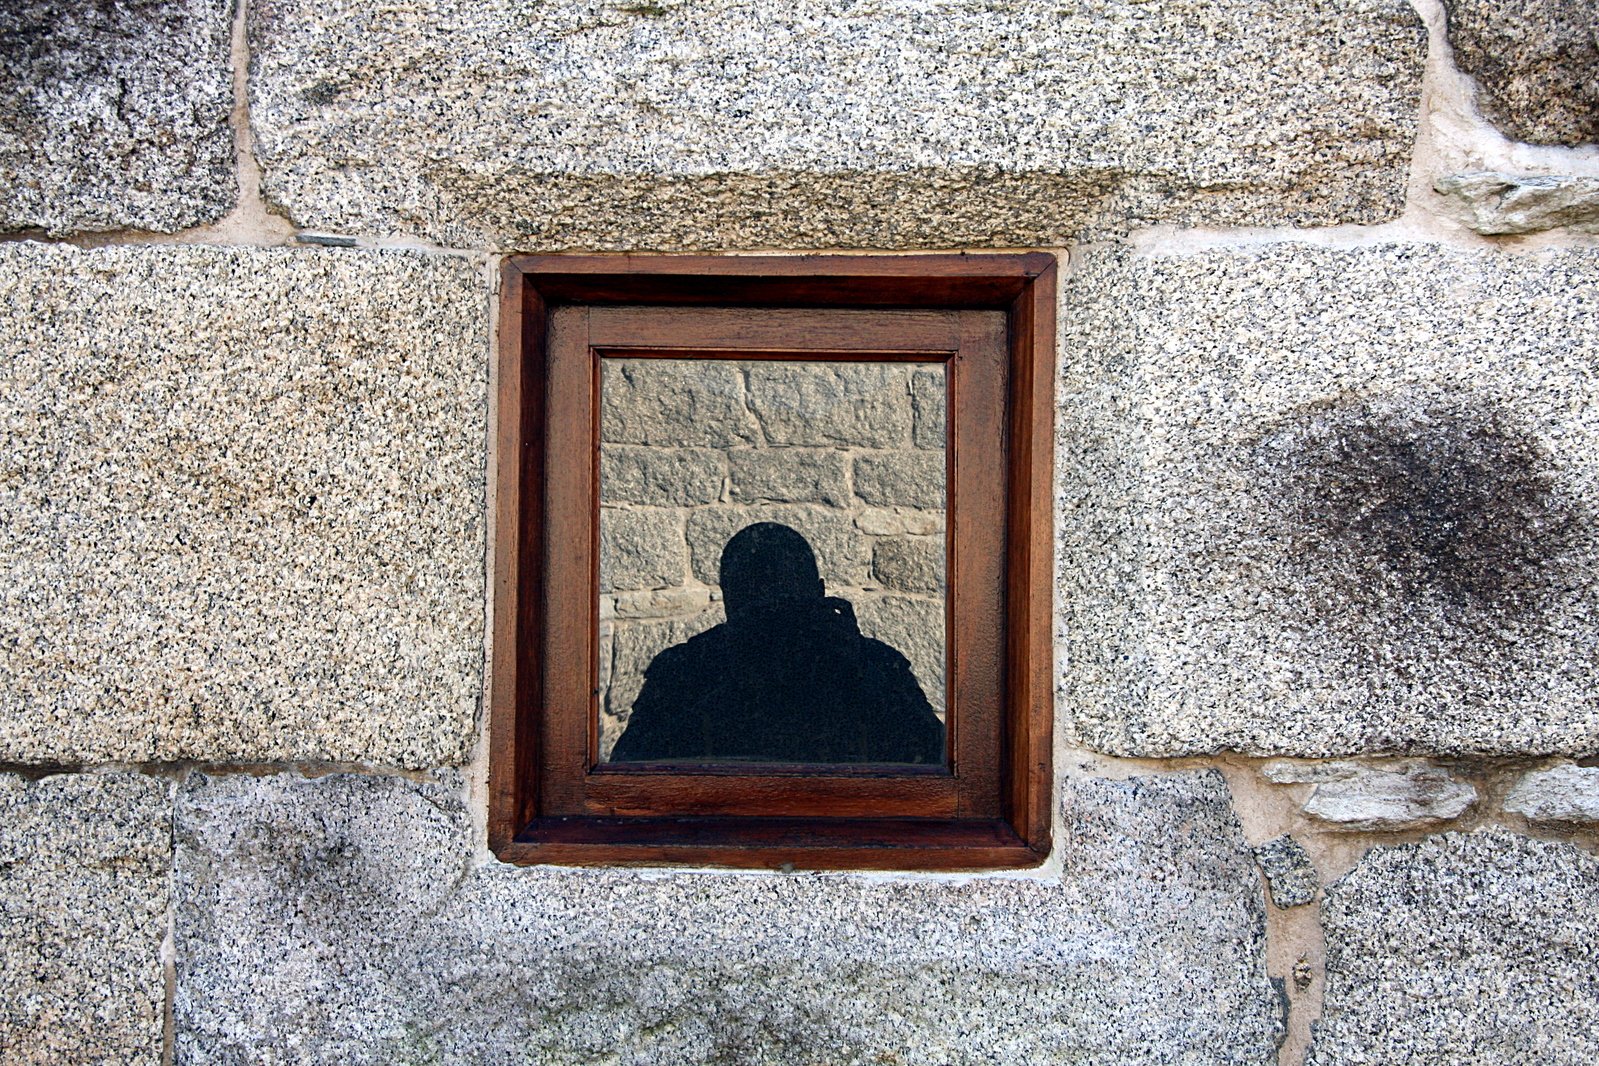 a reflection of someone sitting in a window